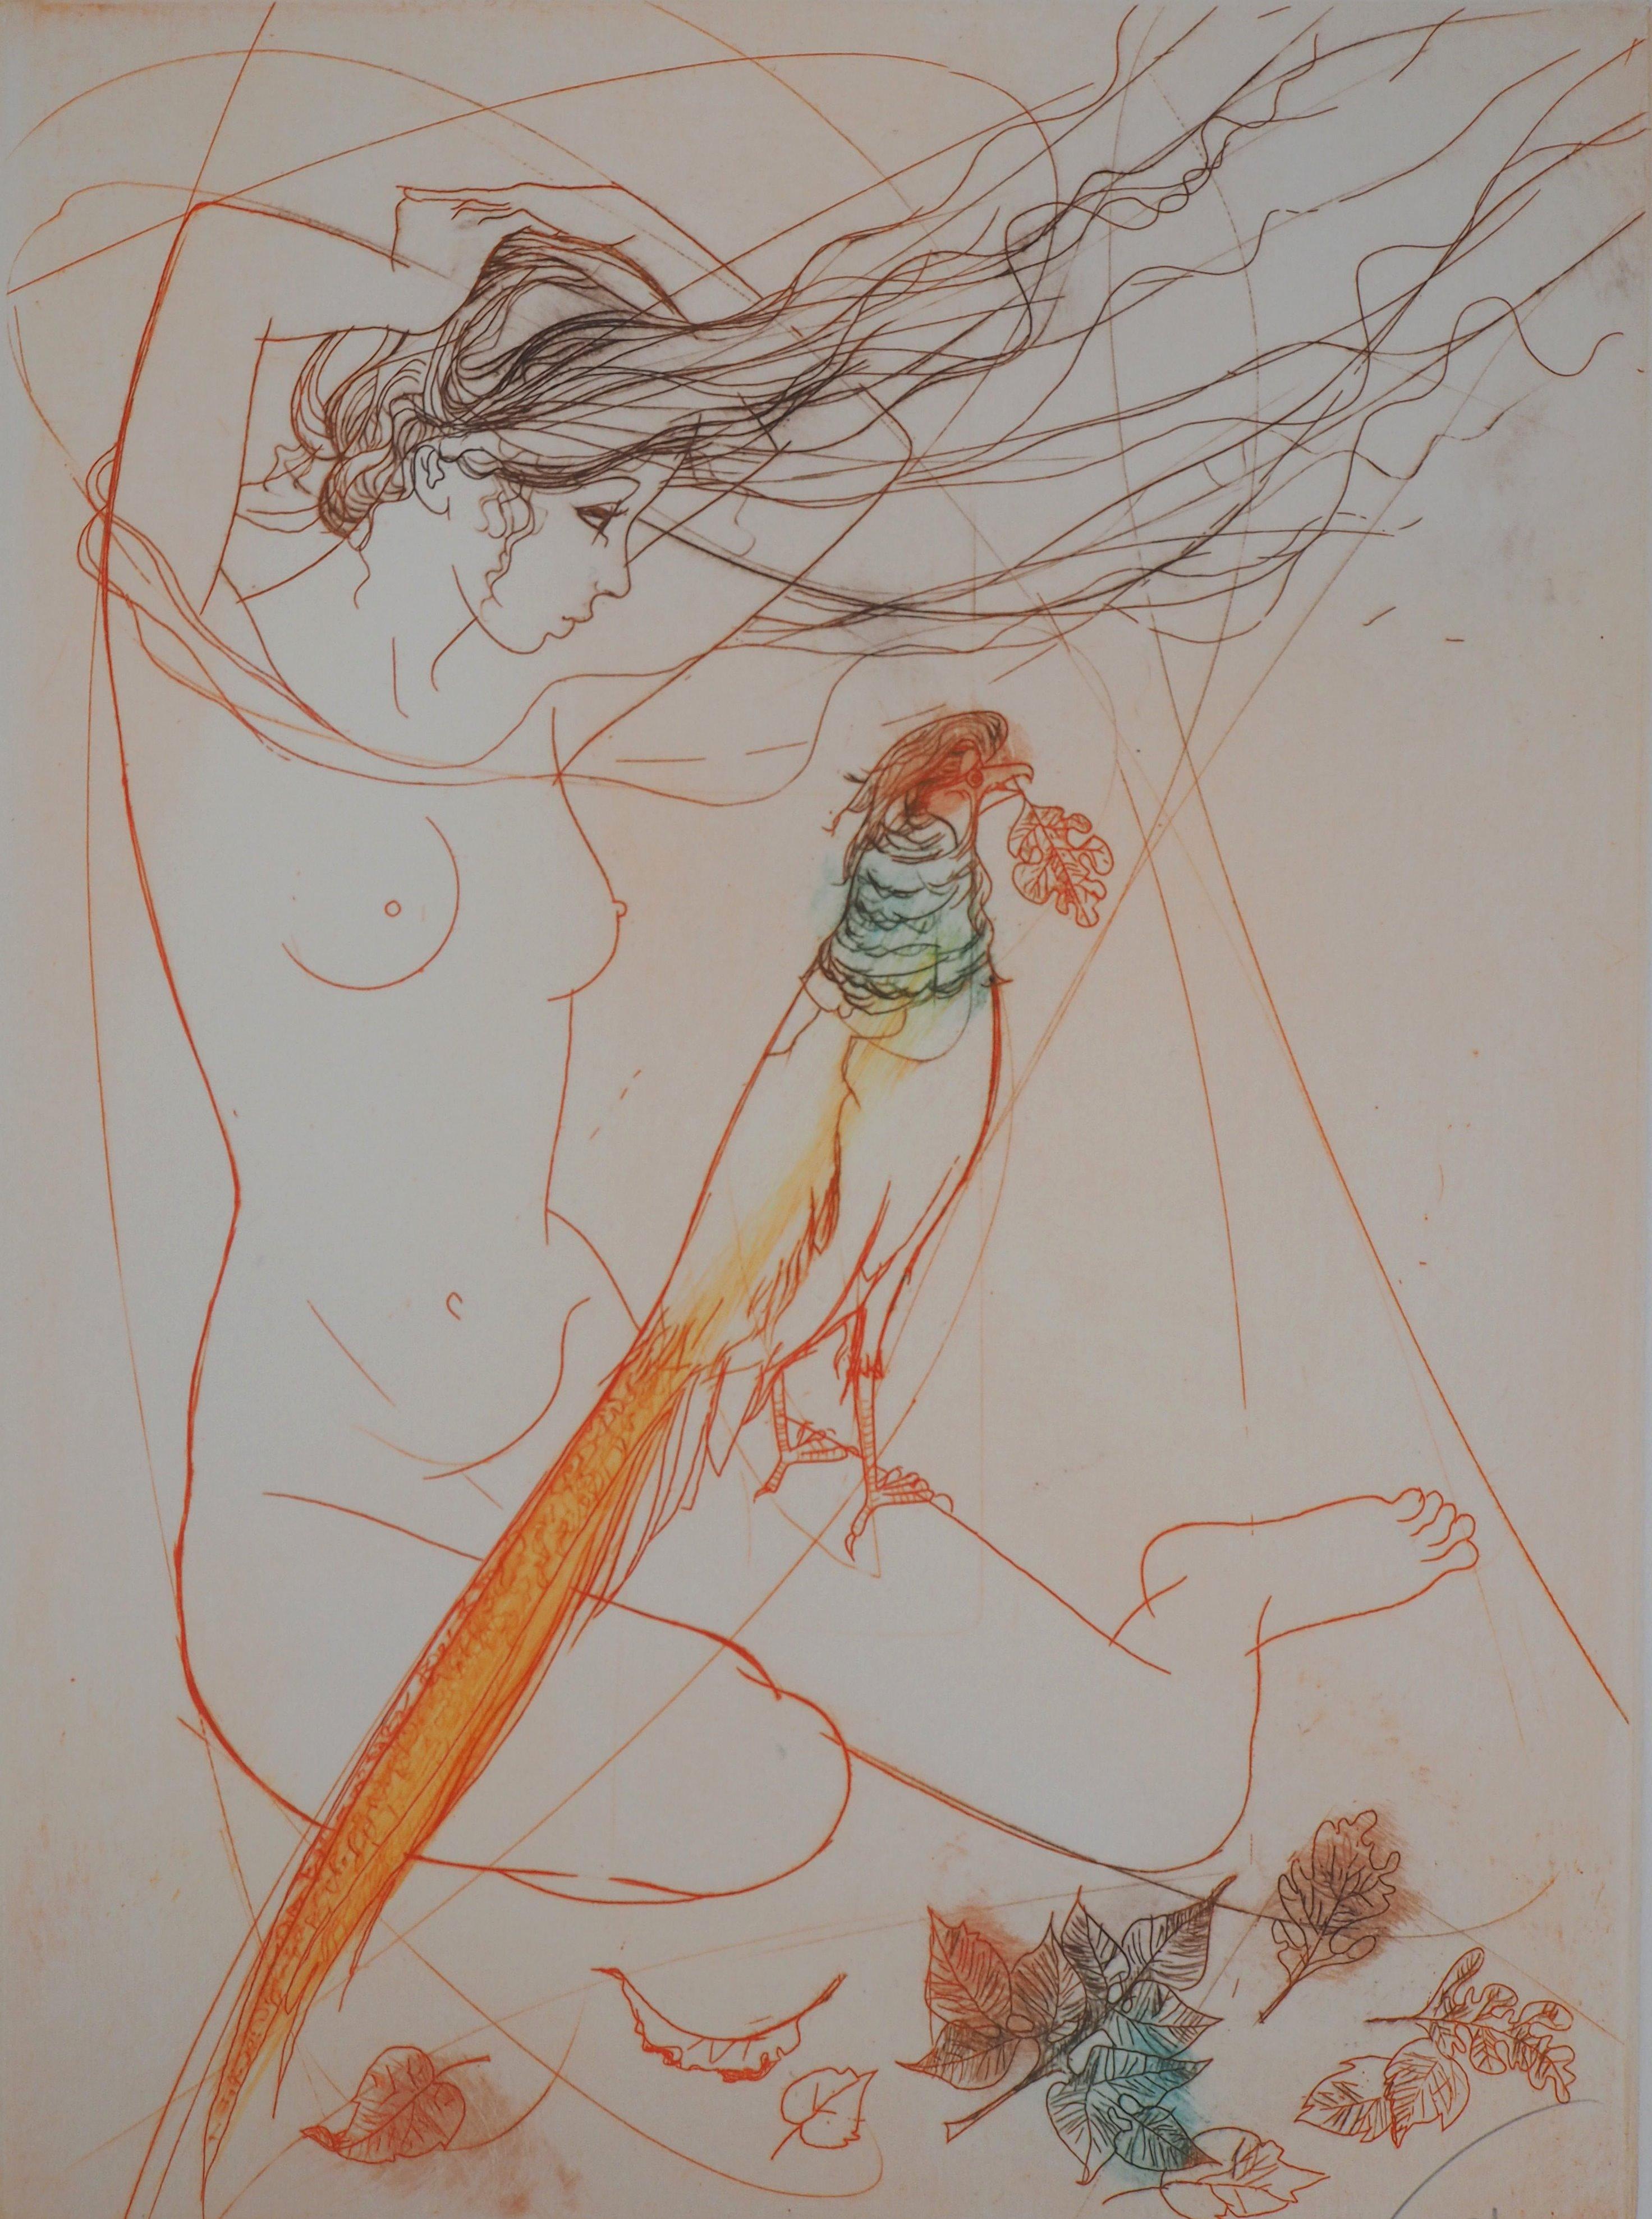 Fall : Woman with a Pheasant - Original Etching, Handsigned - Modern Print by Jean-Baptiste Valadie